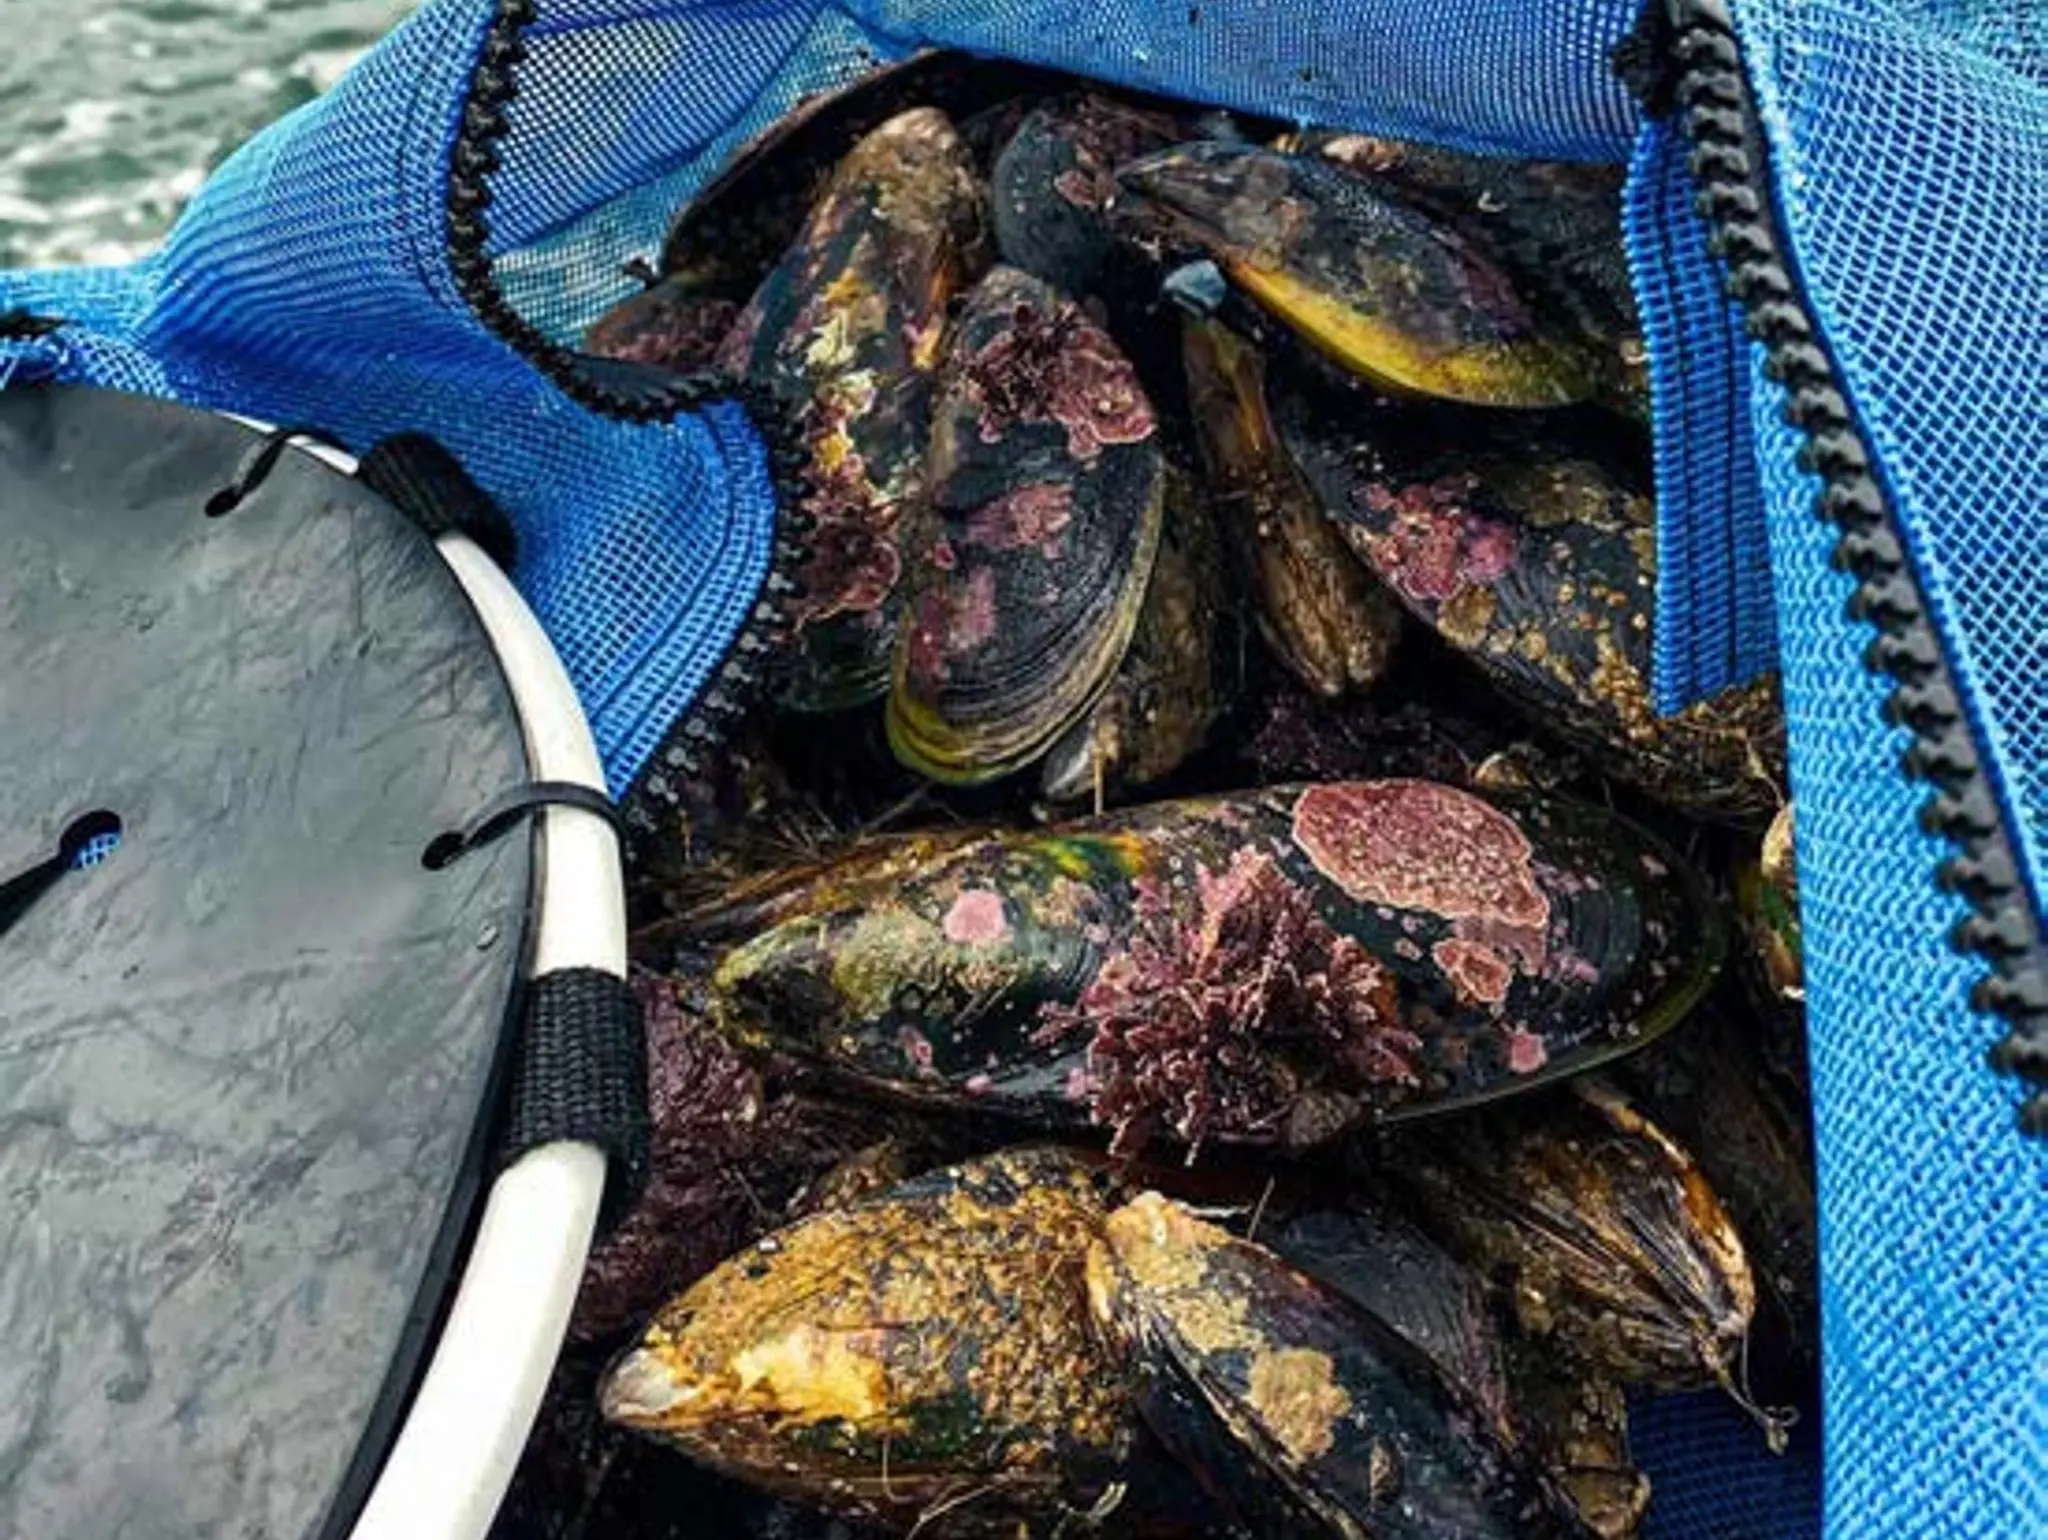 Ministry Notebook: SHELLFISH OFFENDING